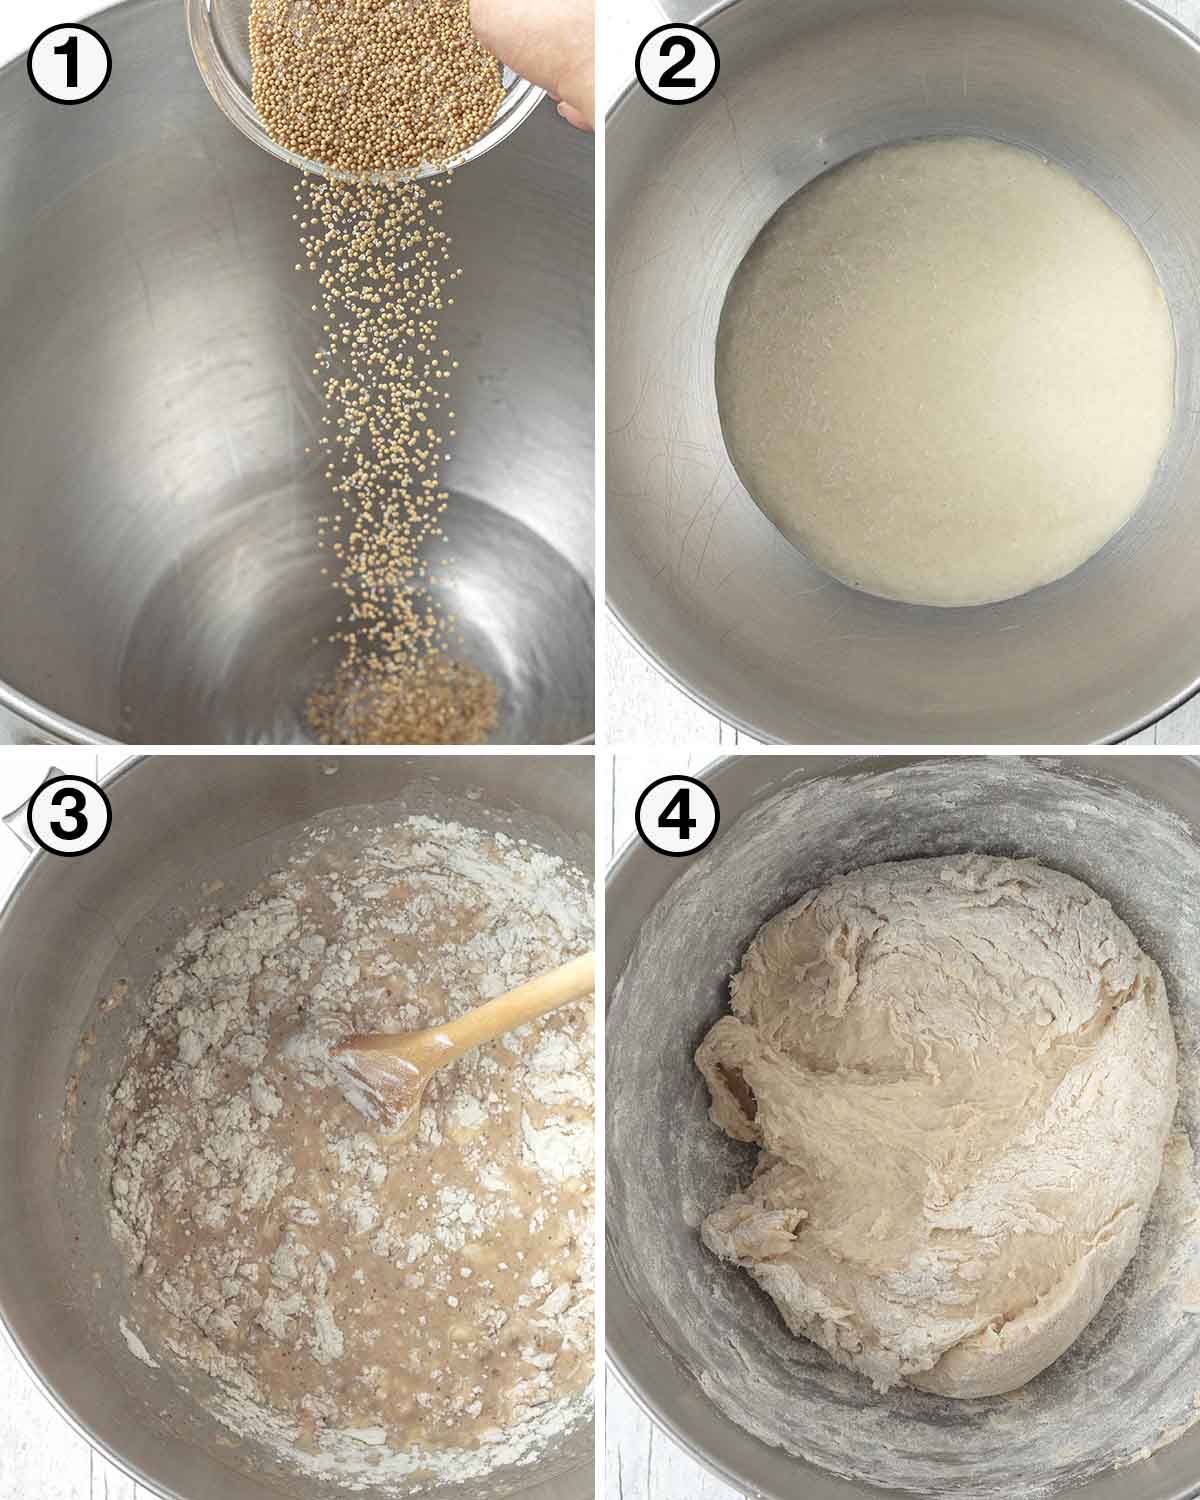 A collage of four images showing the first sequence of steps needed to make vegan cinnamon rolls.